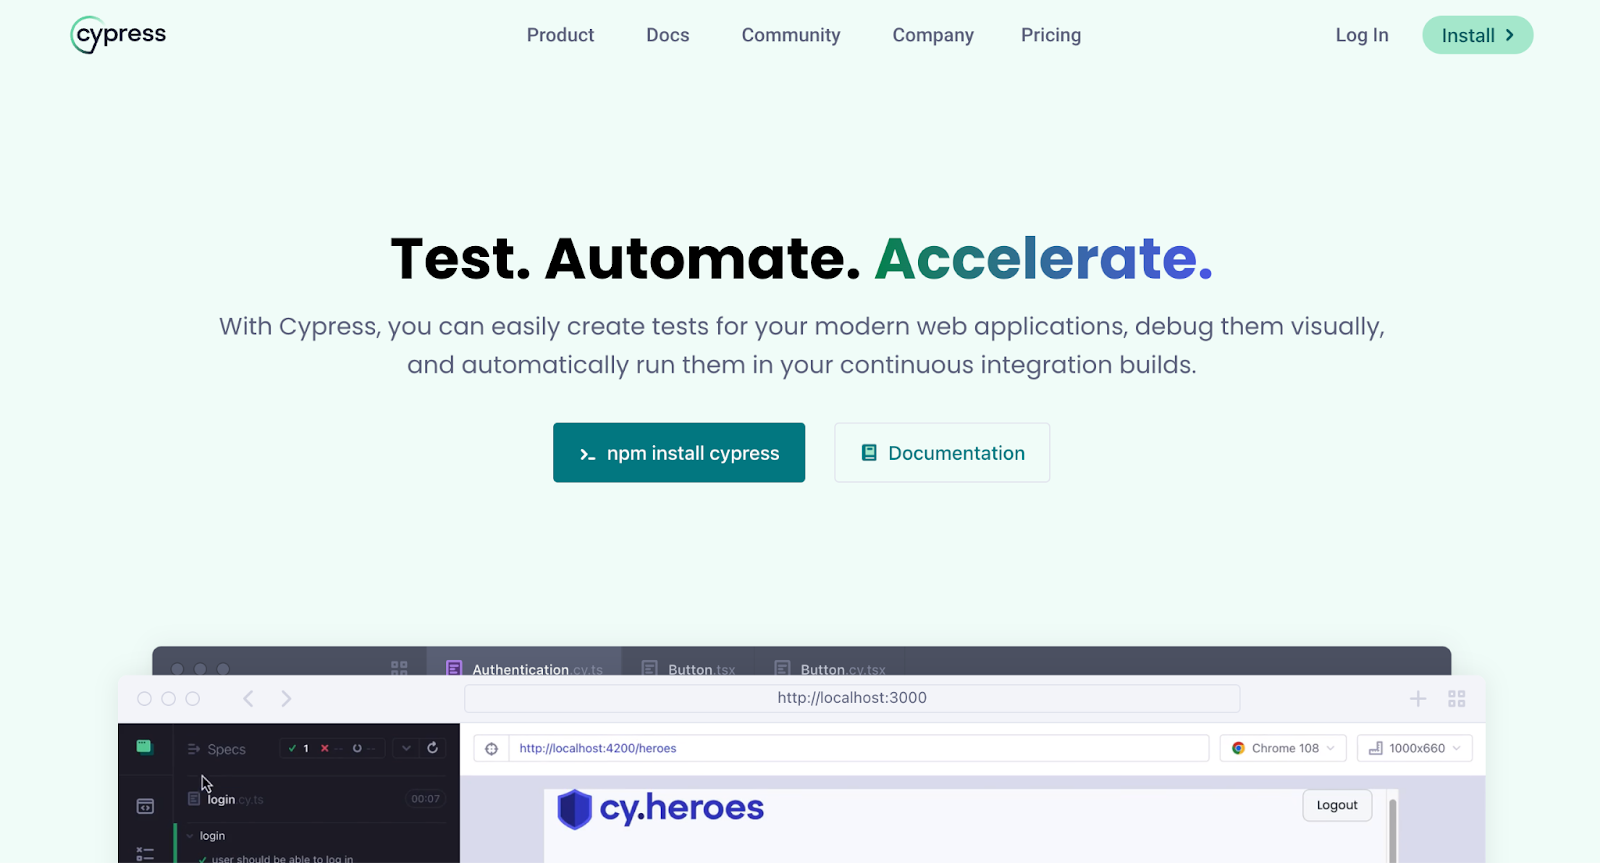 Cypress- Tool for Automating Test Scripts